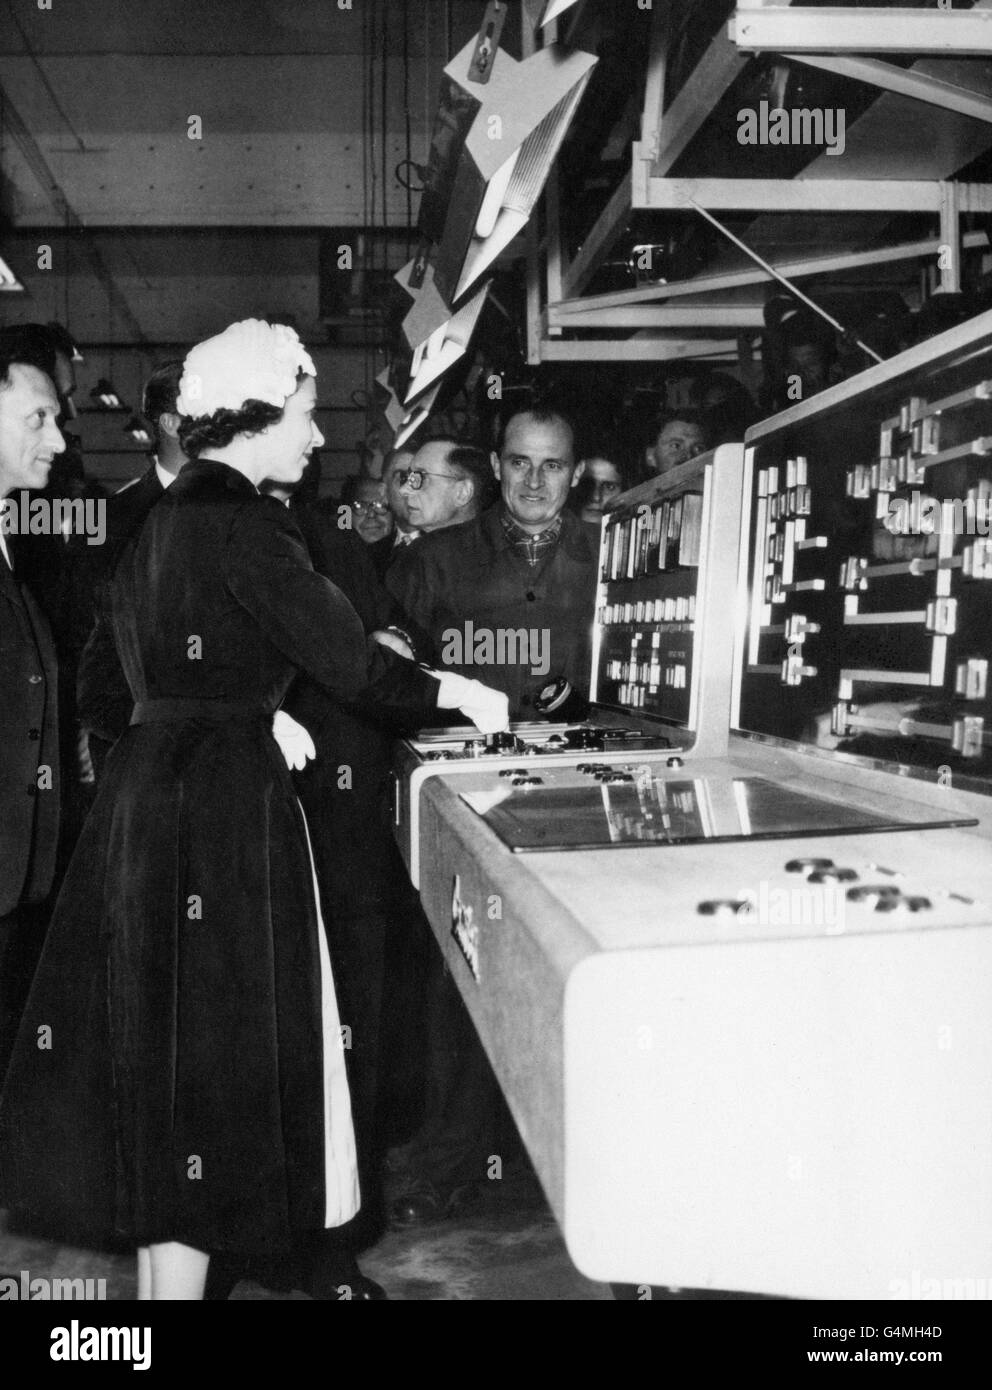 Queen Elizabeth II presses a button on a control panel and brings the production lines to a stop during her visit with the Duke of Edinburgh to the Renault car factory at Flins. Stock Photo